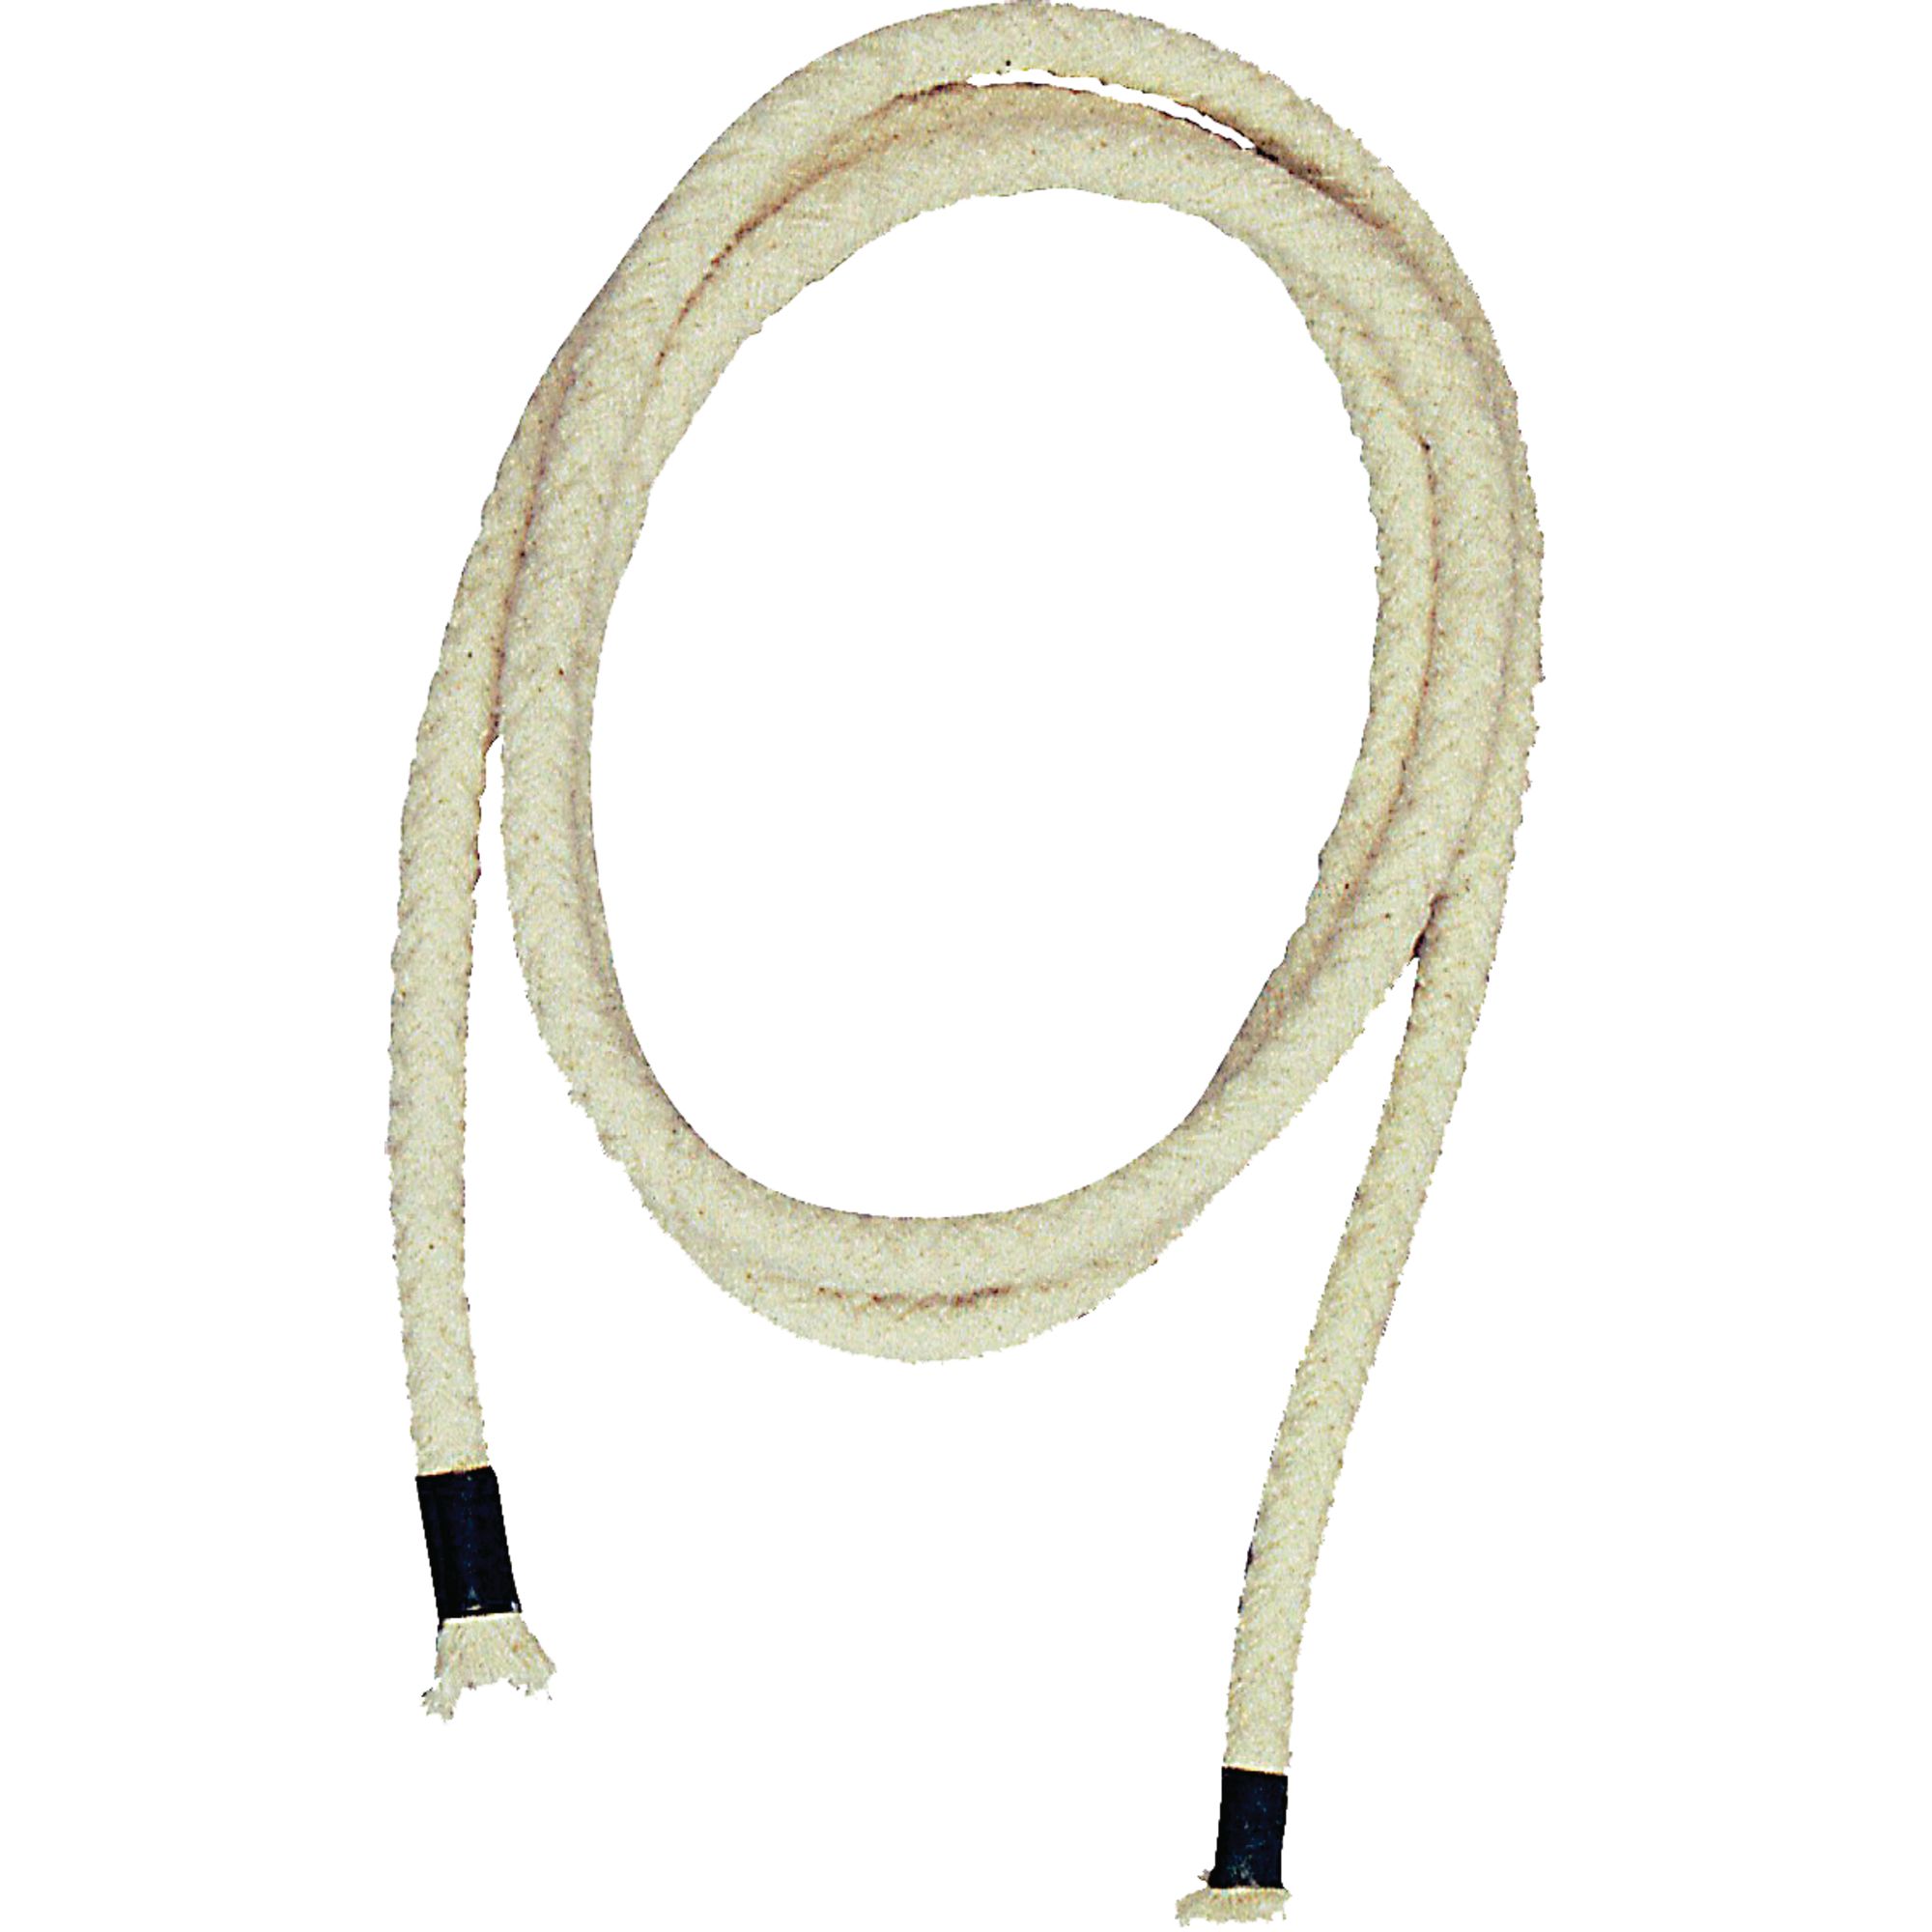 Cotton Skipping Rope - 7ft